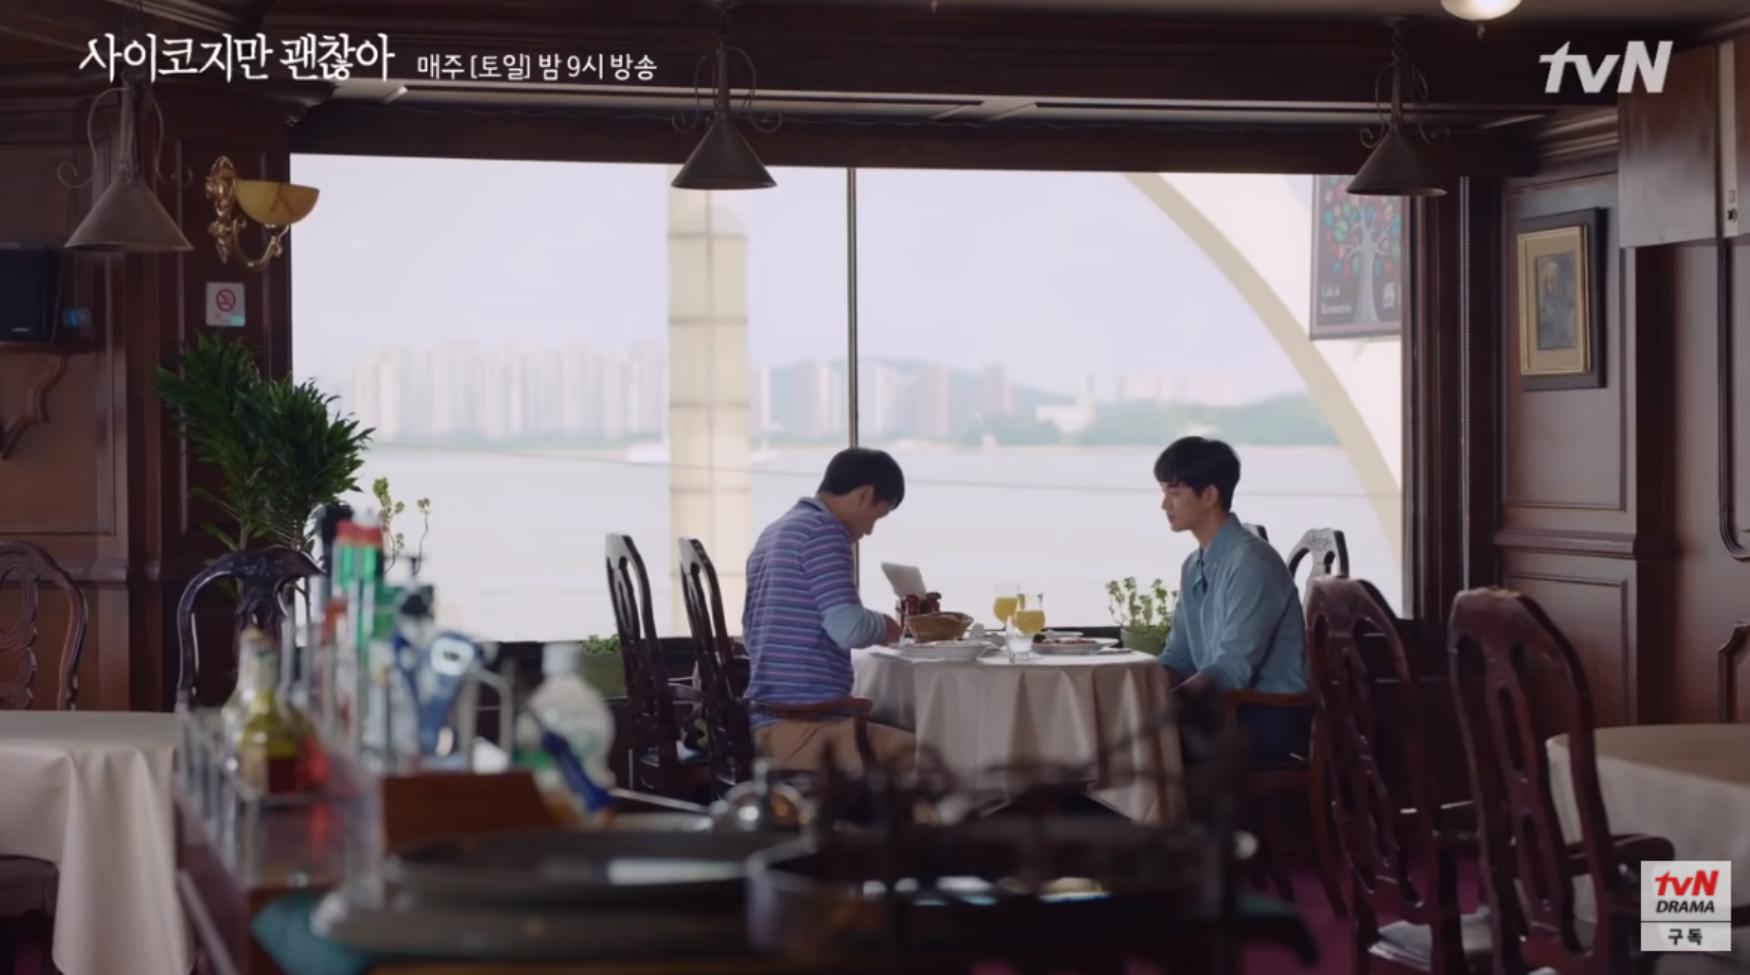 Yejeon | The Delicious Western Restaurant As Seen In K-Drama 'It's Okay To Not Be Okay'